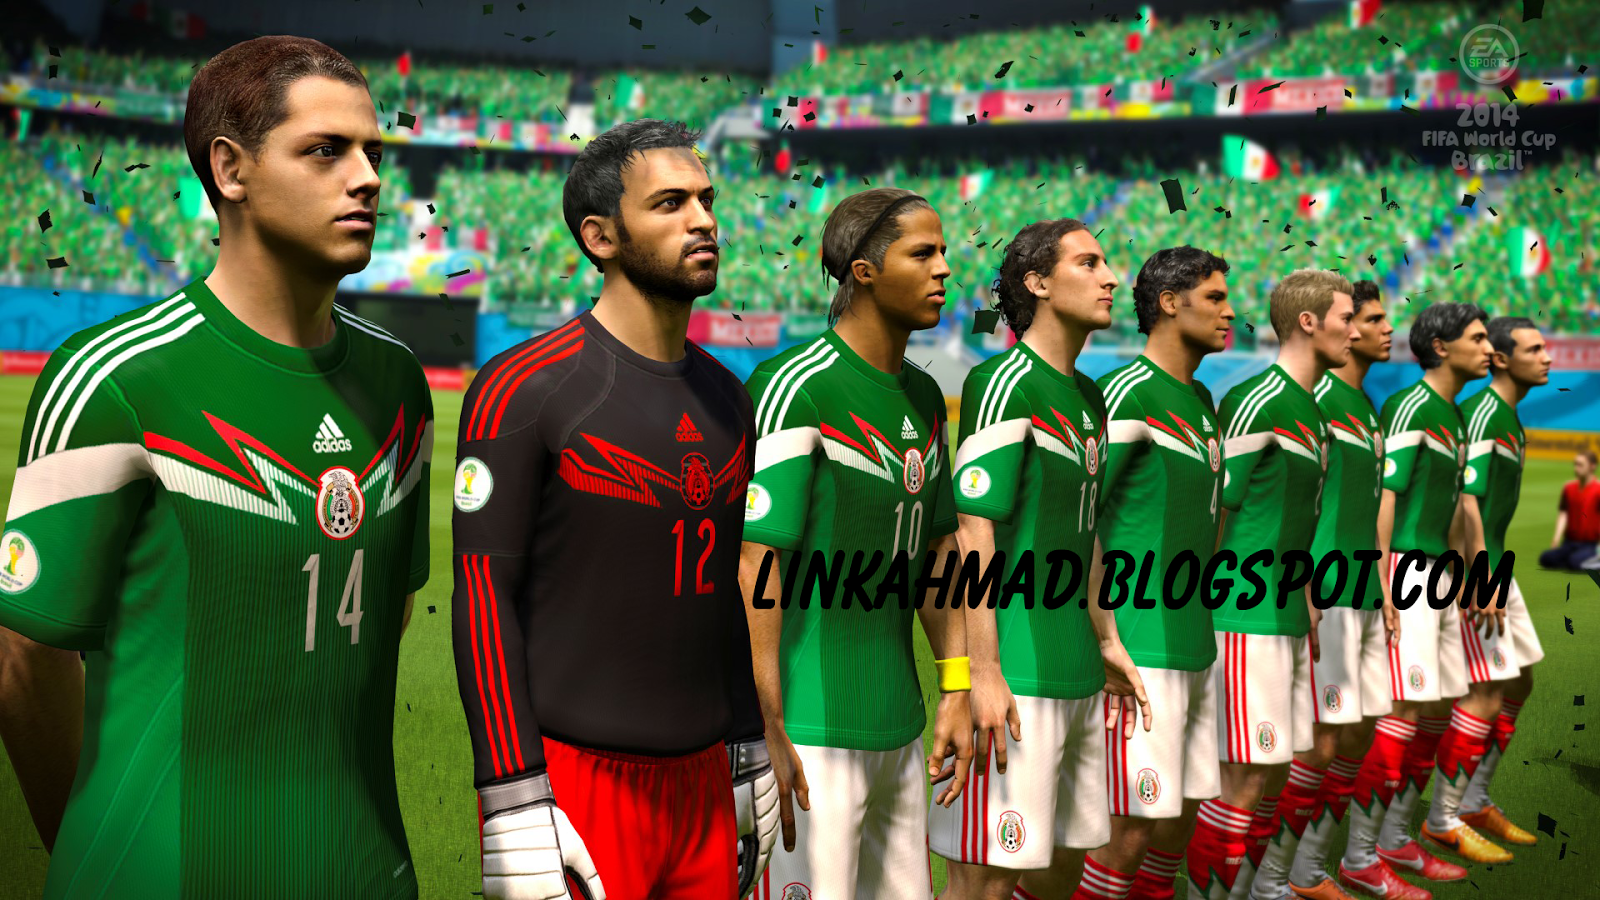 fifa 18 world cup pc download free